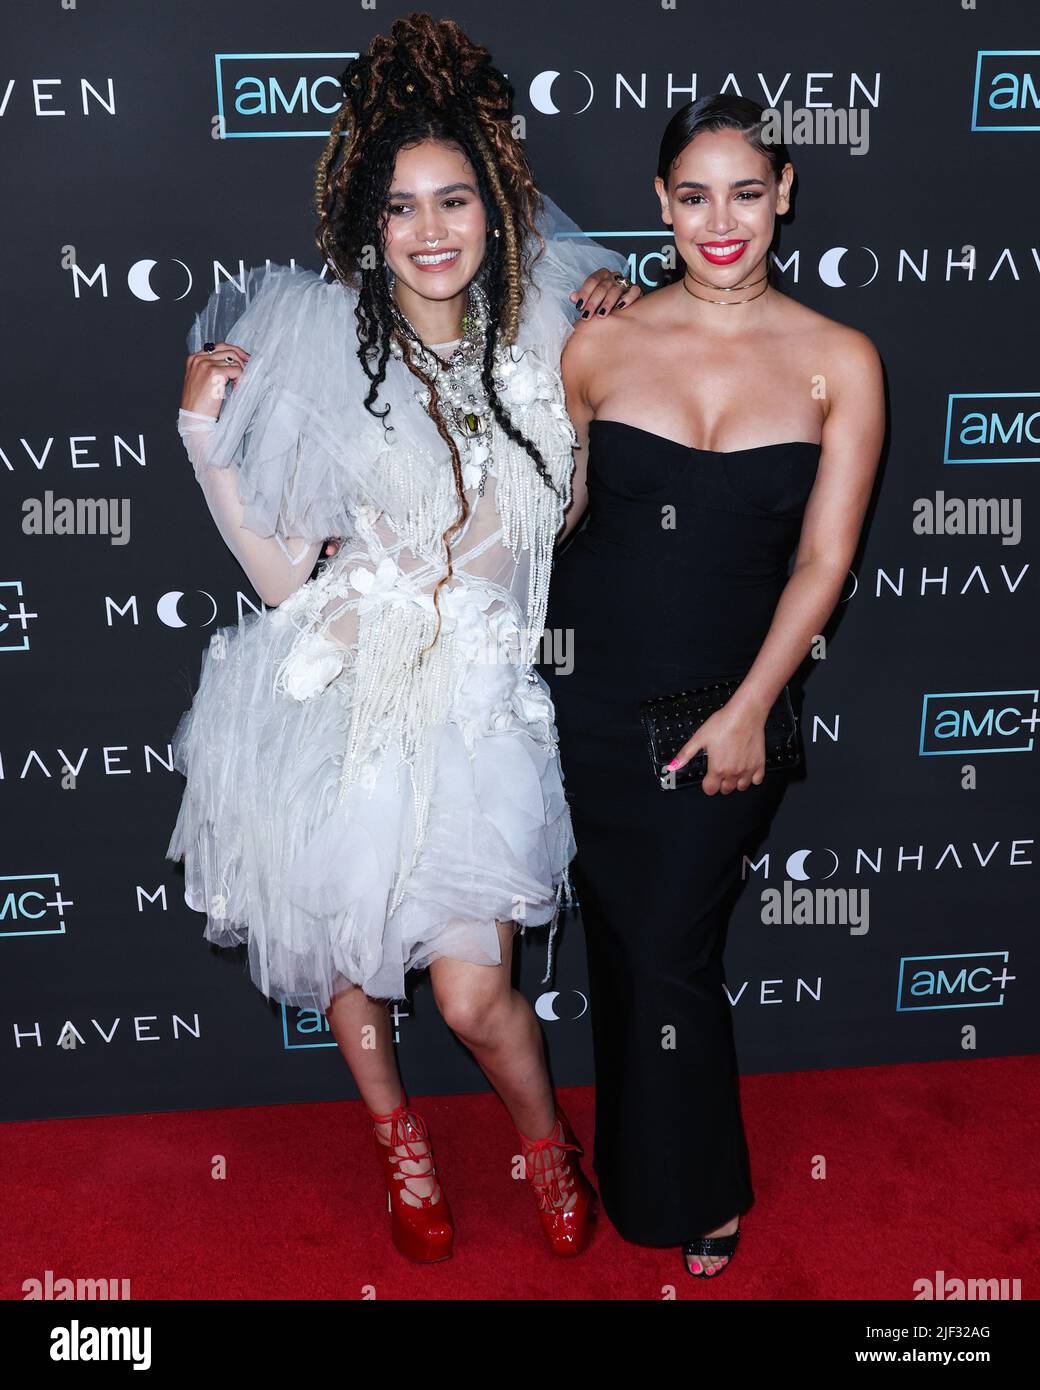 WEST HOLLYWOOD, LOS ANGELES, CALIFORNIA, USA - JUNE 28: British actresses Emma McDonald and Yazzmin Newell arrive at the Los Angeles Premiere Of AMC+'s Original Series 'Moonhaven' held at the The London Hotel West Hollywood at Beverly Hills on June 28, 2022 in West Hollywood, Los Angeles, California, United States. (Photo by Xavier Collin/Image Press Agency) Stock Photo